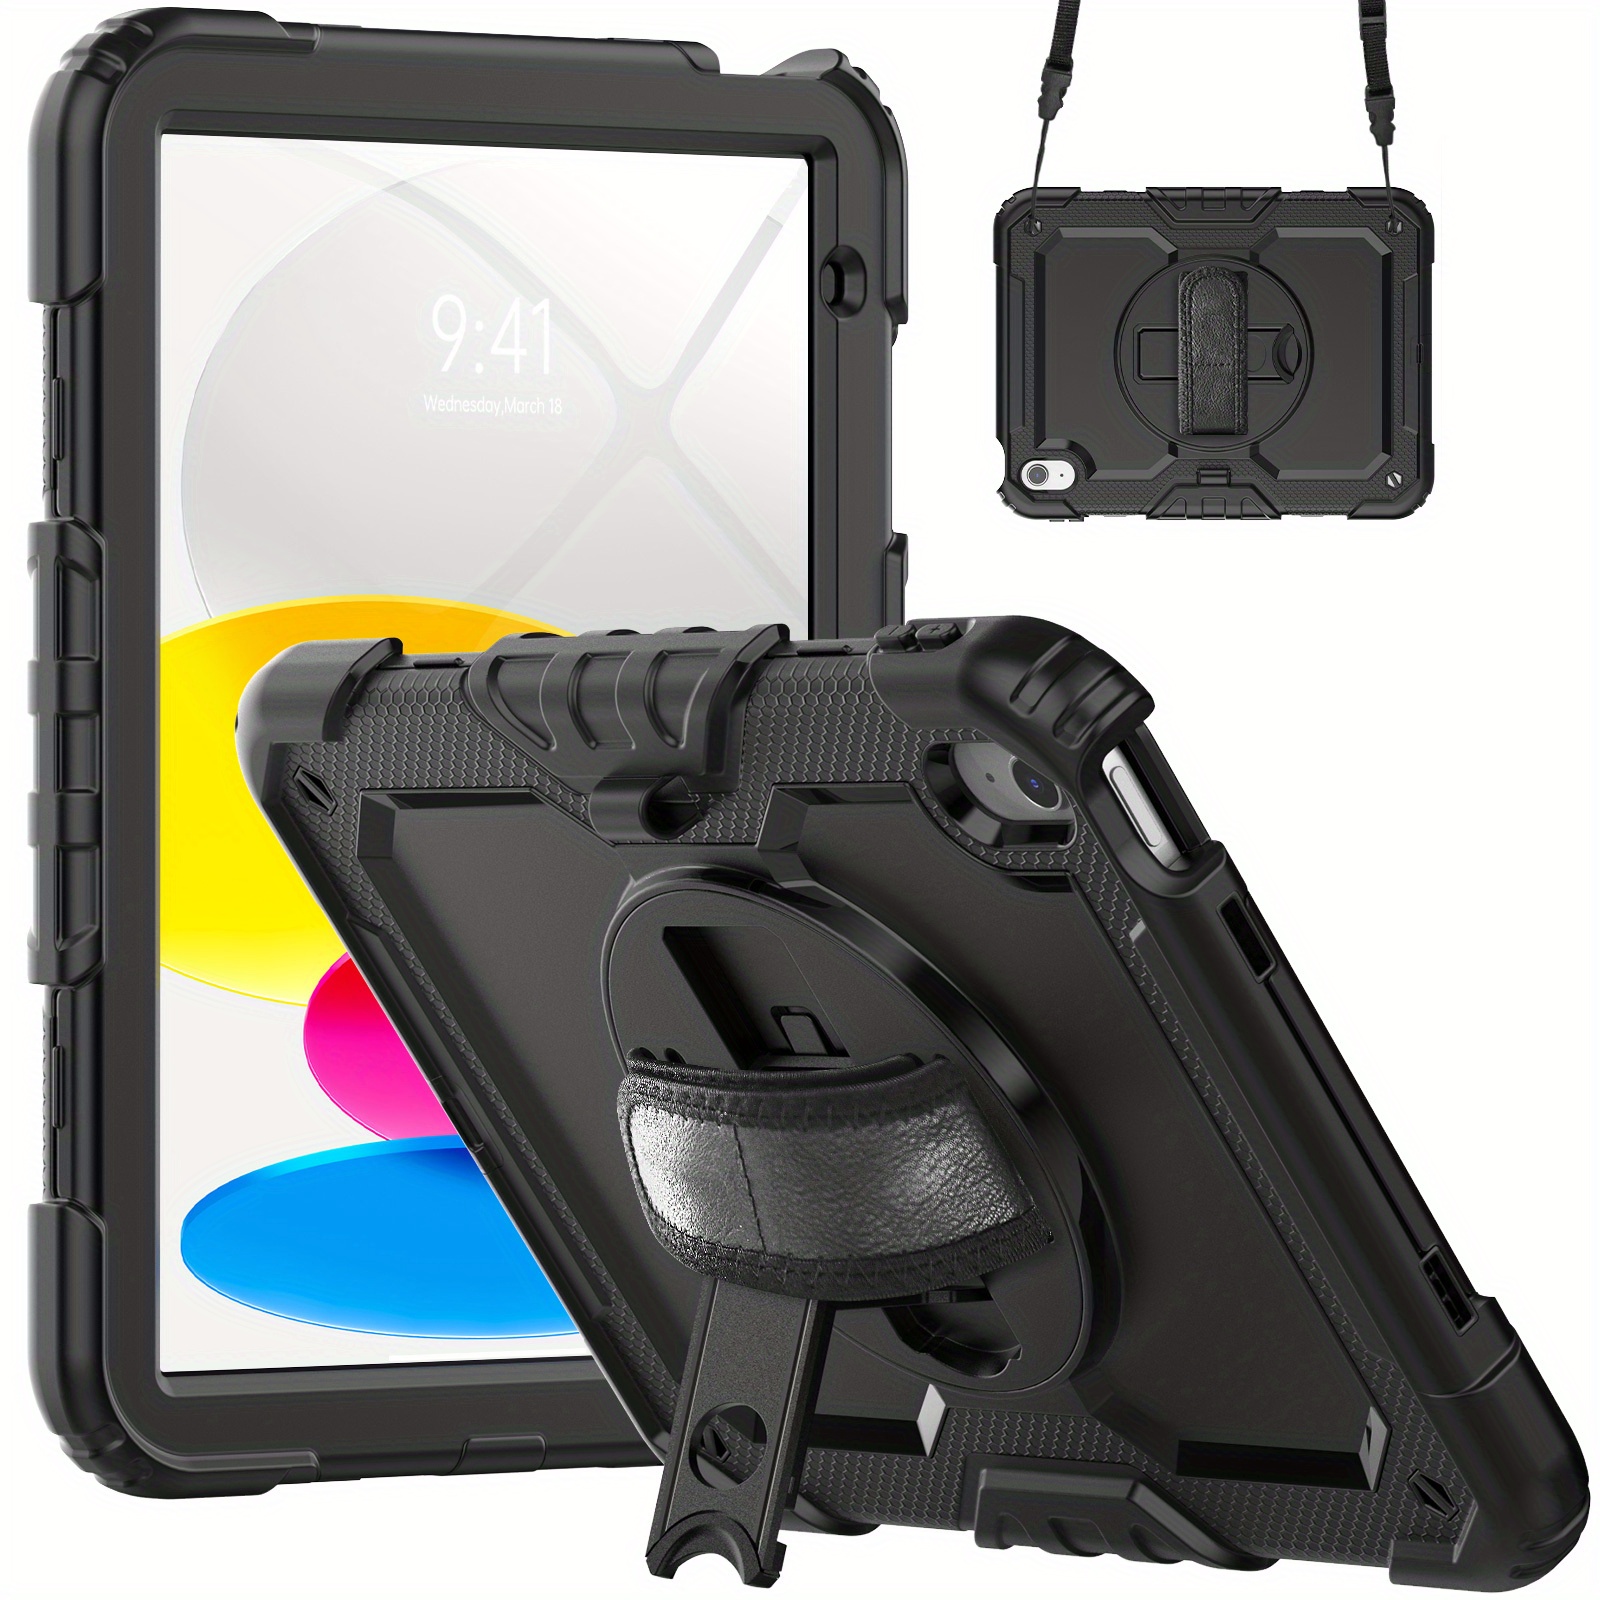 Military Grade Shockproof Pad Case for IPad 10th Gen, Mini 4/5/6, 9.7 Air  3/4/5, Pro 11 & 12.9 - Pencil Holder + Handle Shoulder Strap!